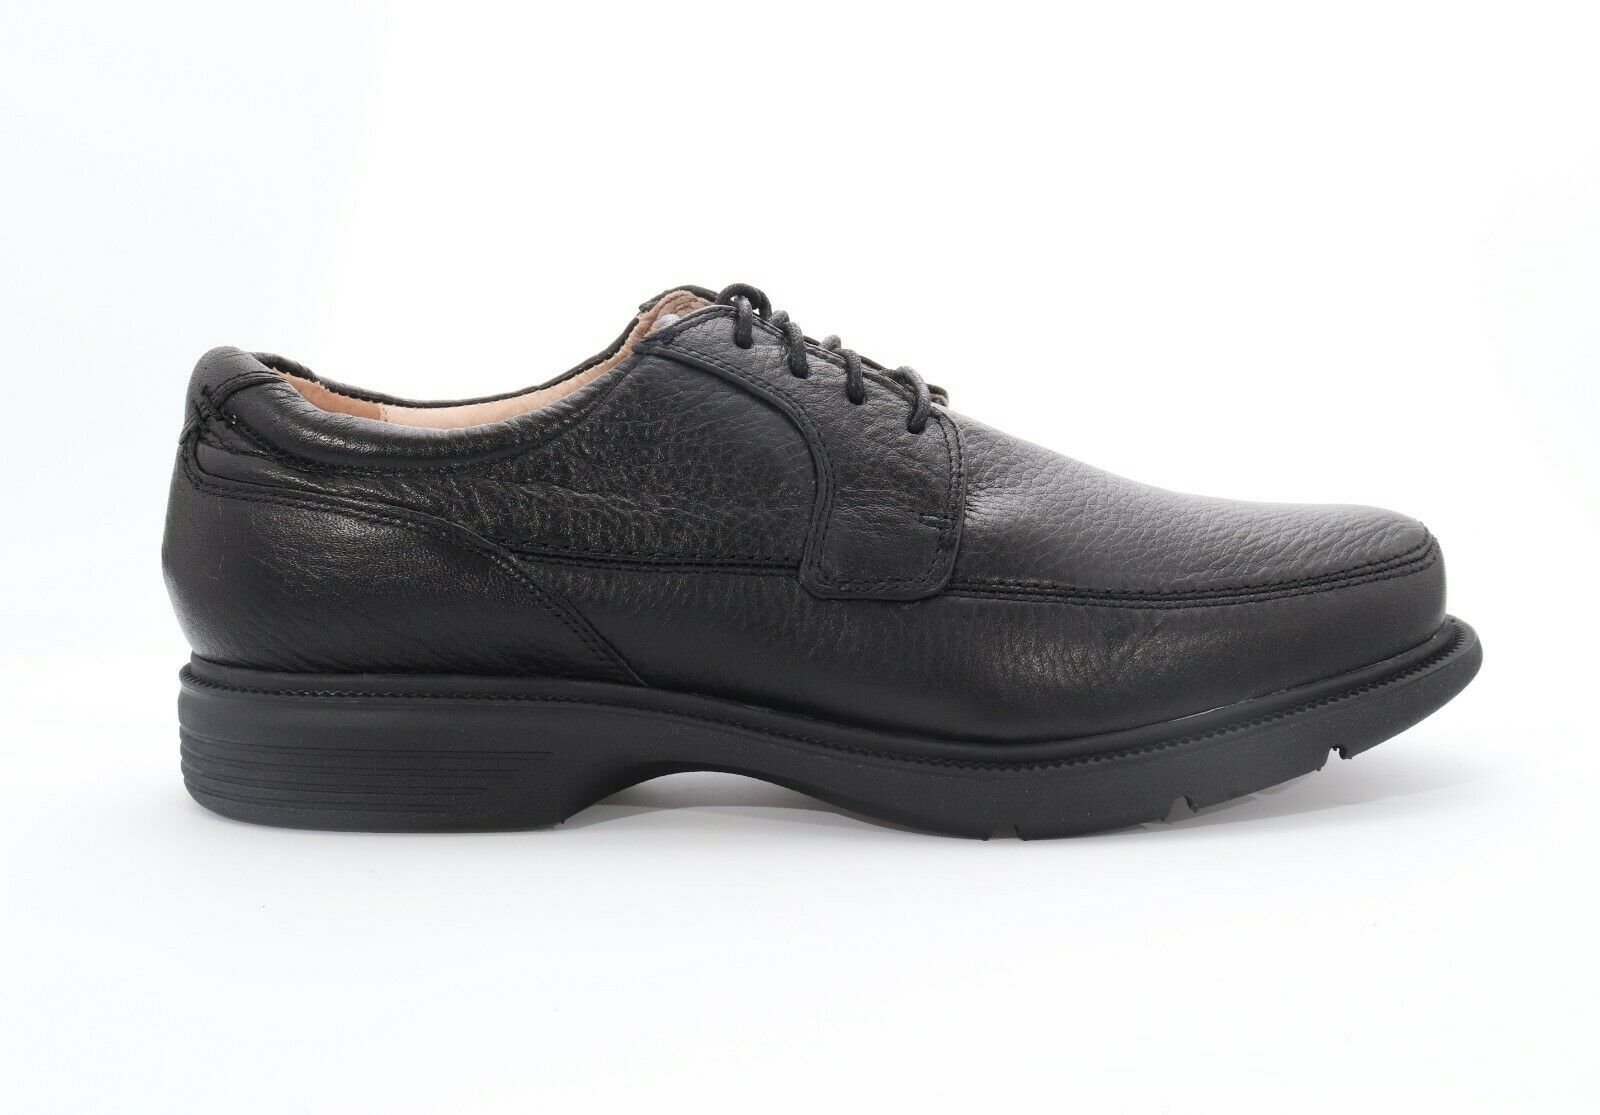 Primary image for Abeo Logan  Casual Lace Up Shoes Black Size US 10.5  Neutral ()3192